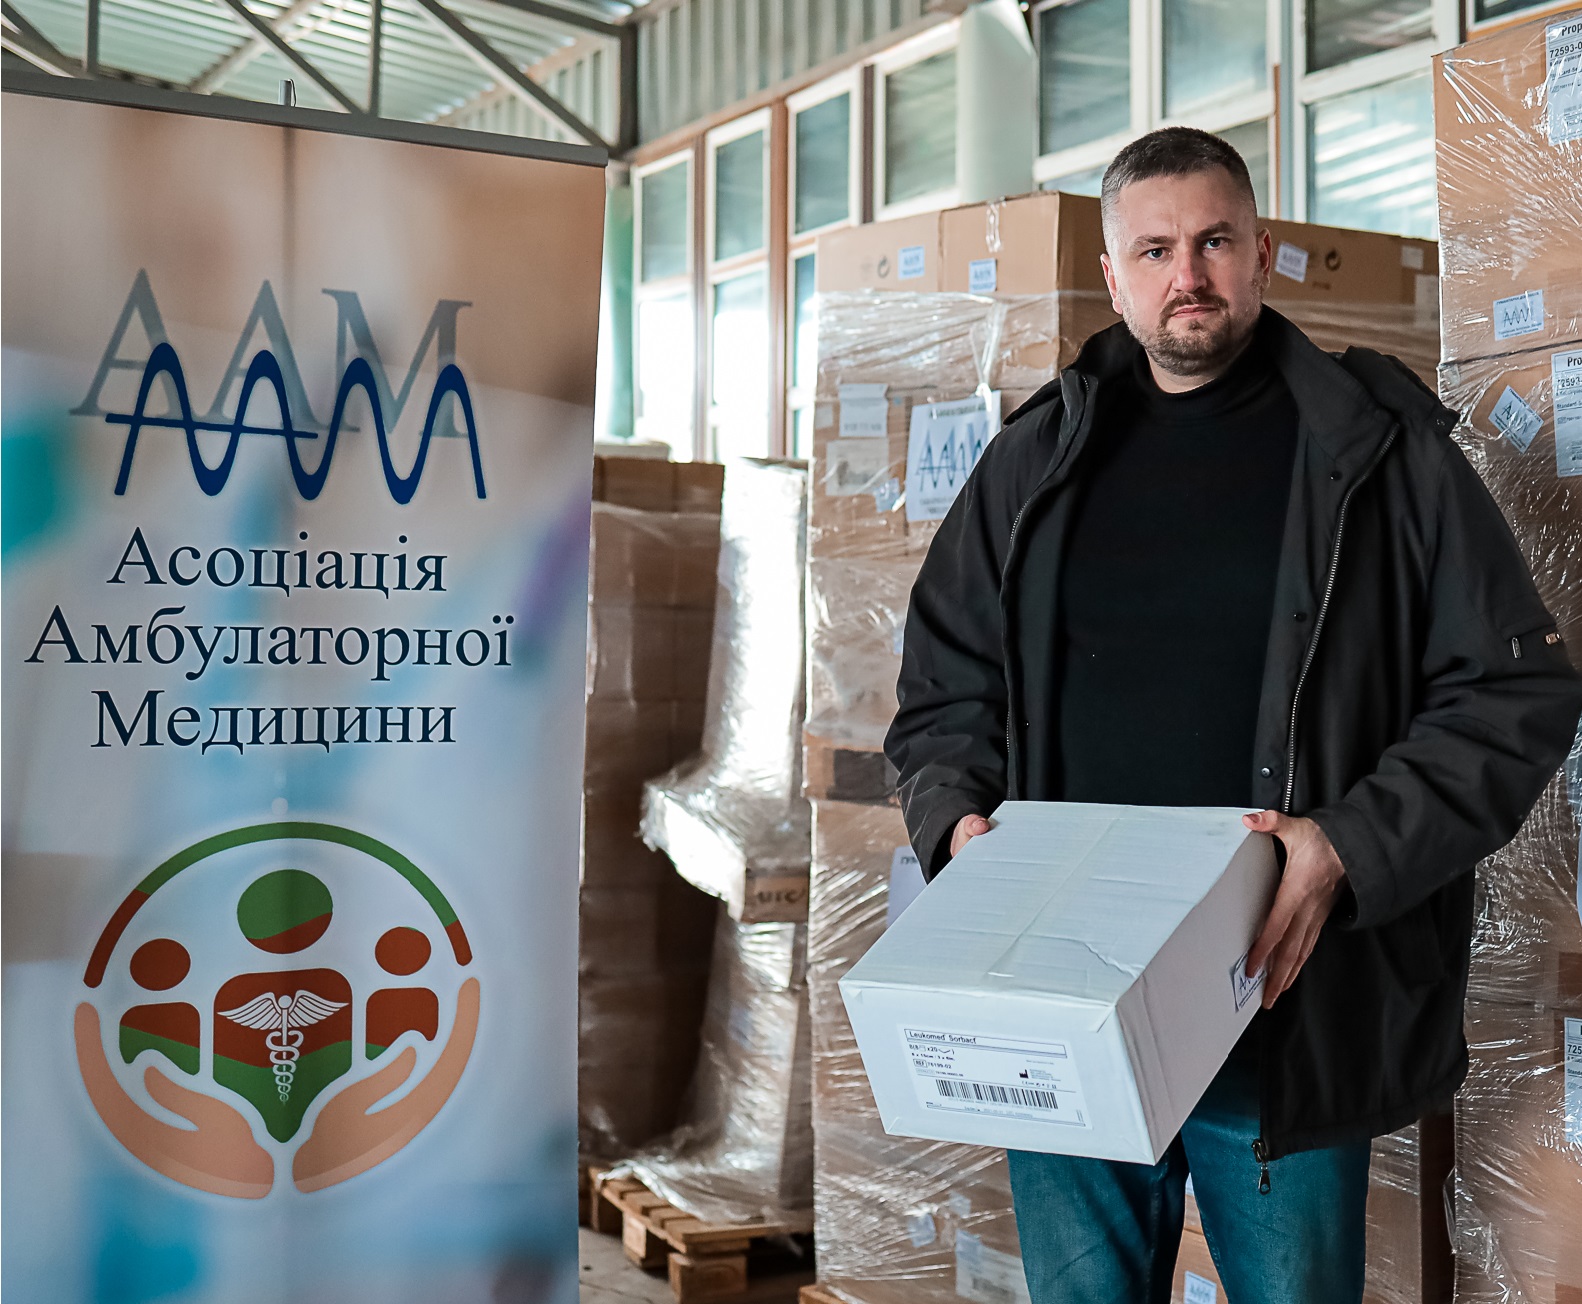 Representatives of the AAM handed over humanitarian aid to Zaporizhia medical institutions